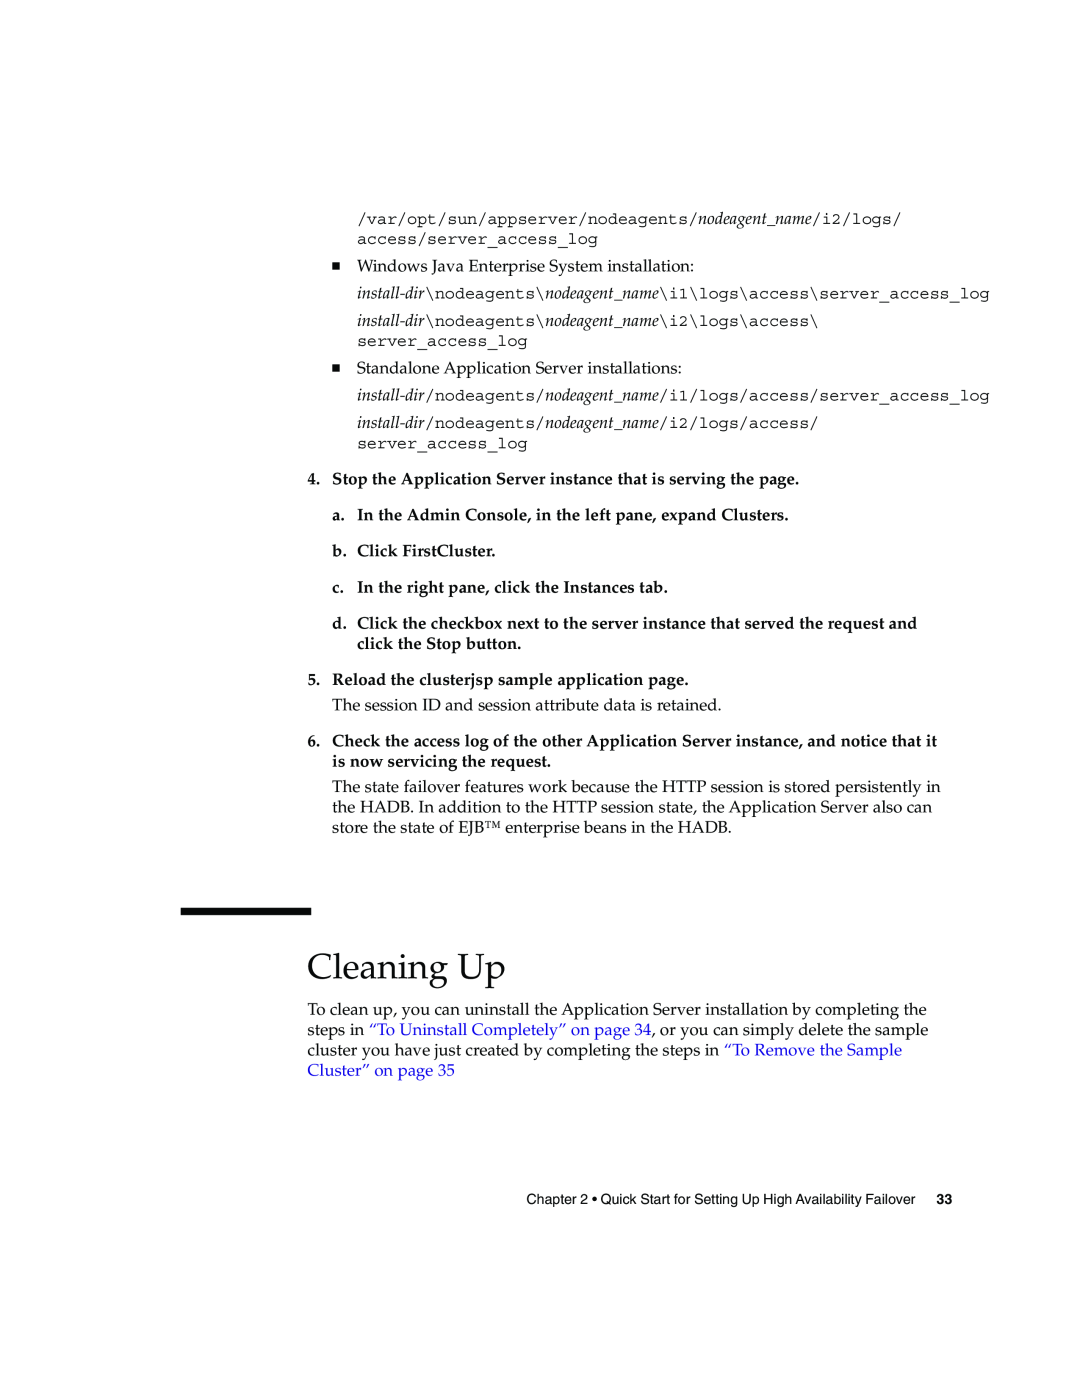 Sun Microsystems 2005Q2 quick start Cleaning Up, Stop the Application Server instance that is serving the page 